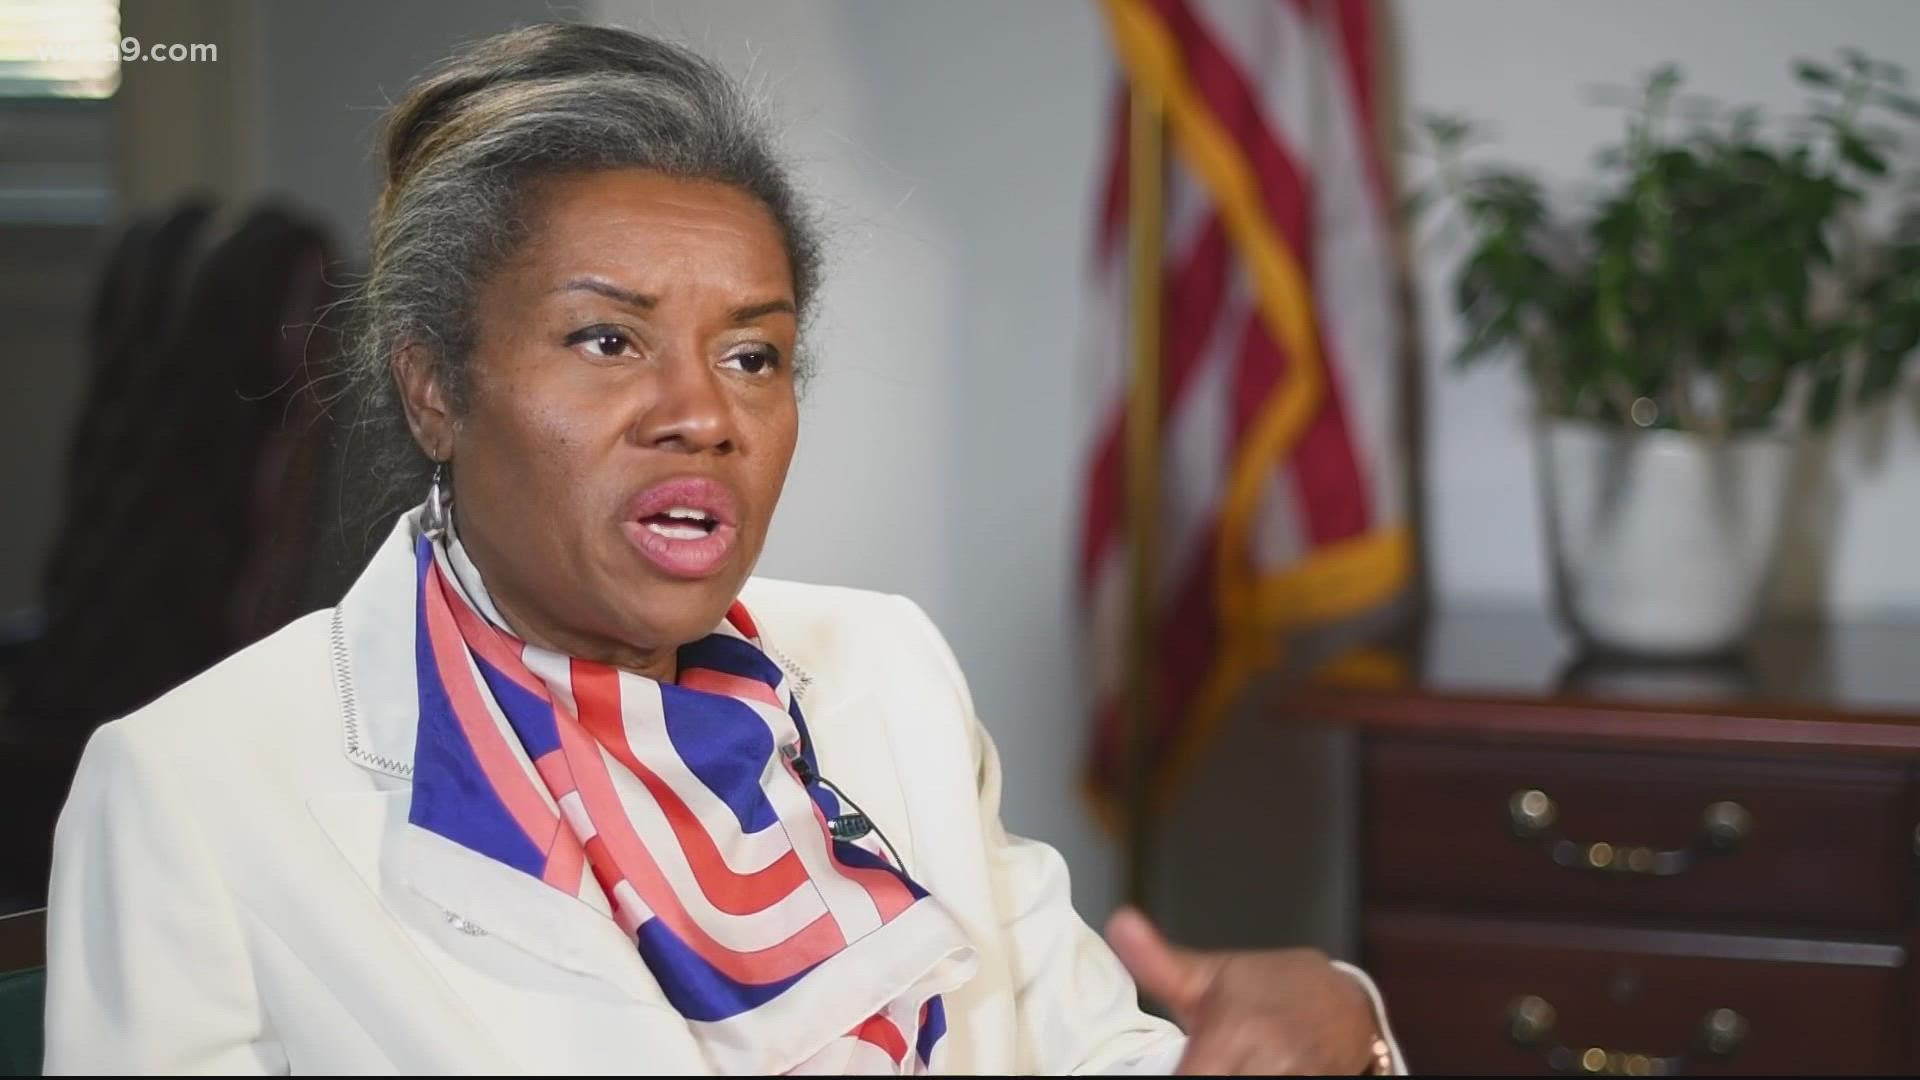 In an exclusive interview, Lt. Governor Winsome Earle-Sears says she's committed to ensuring children in Virginia get a good, quality education.